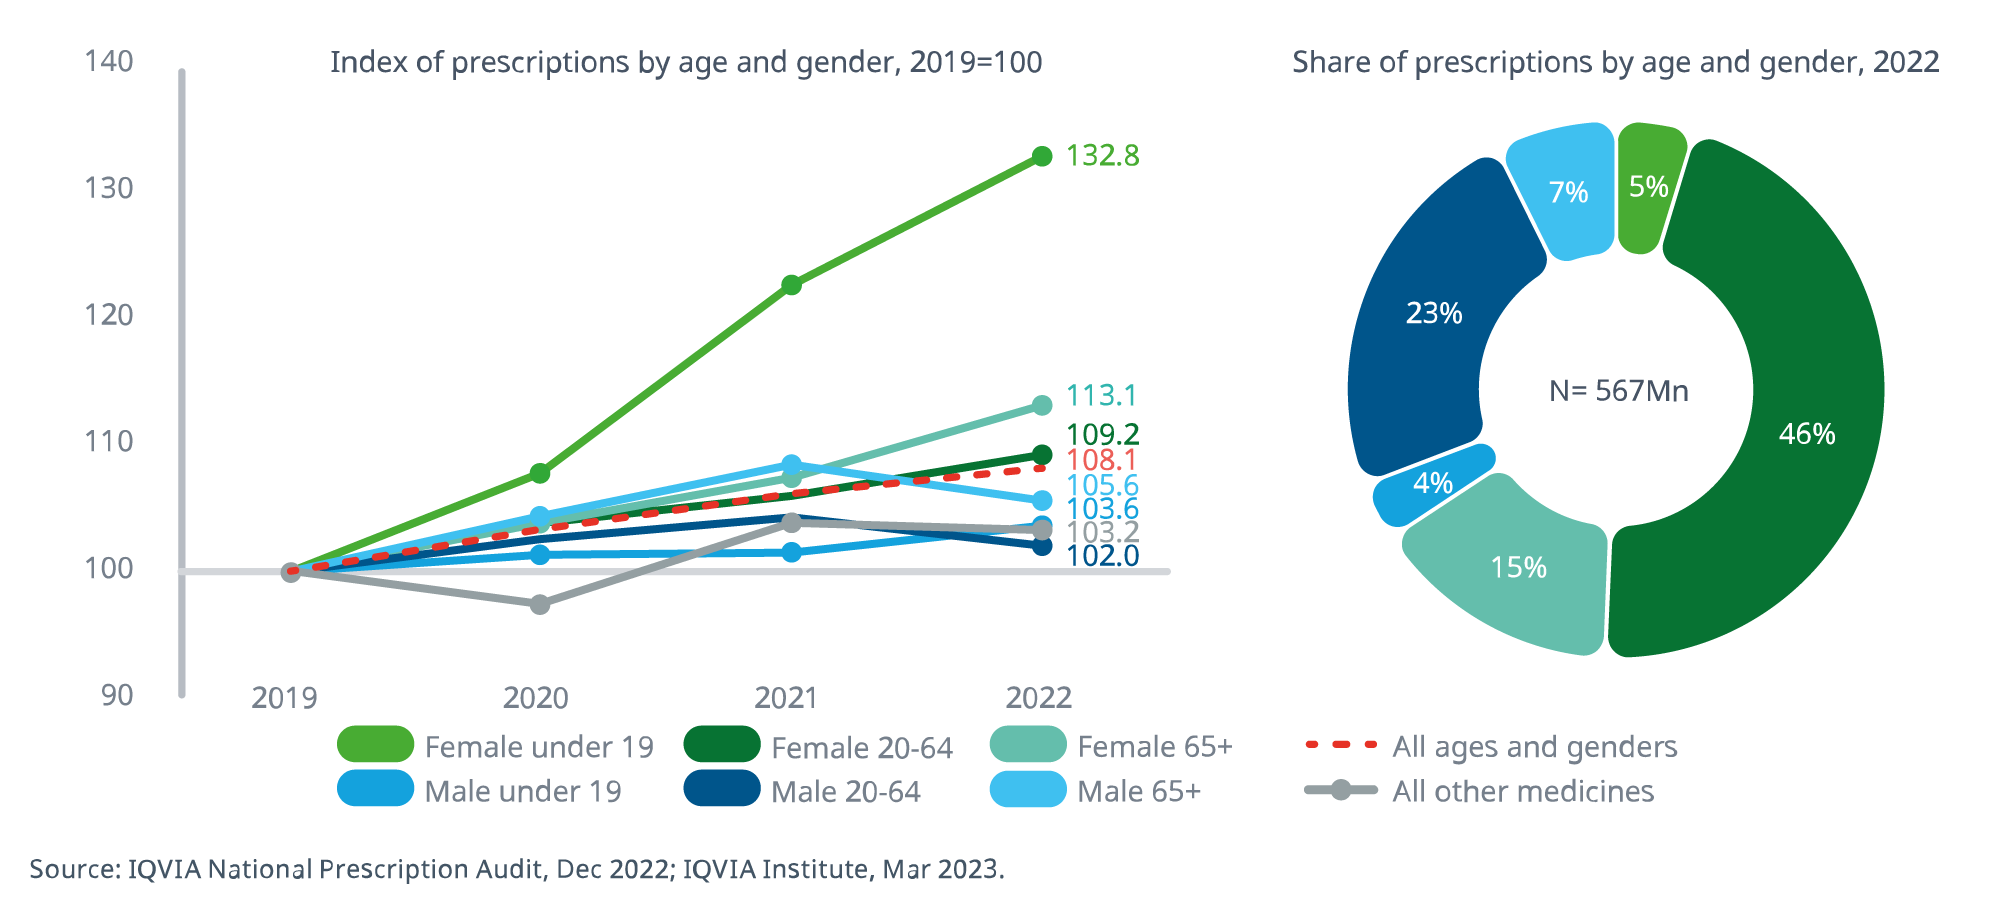 Figure 3. Mental health prescriptions indexed to 2019 values and 2022 shares by age and gender. Image courtesy of IQVIA.